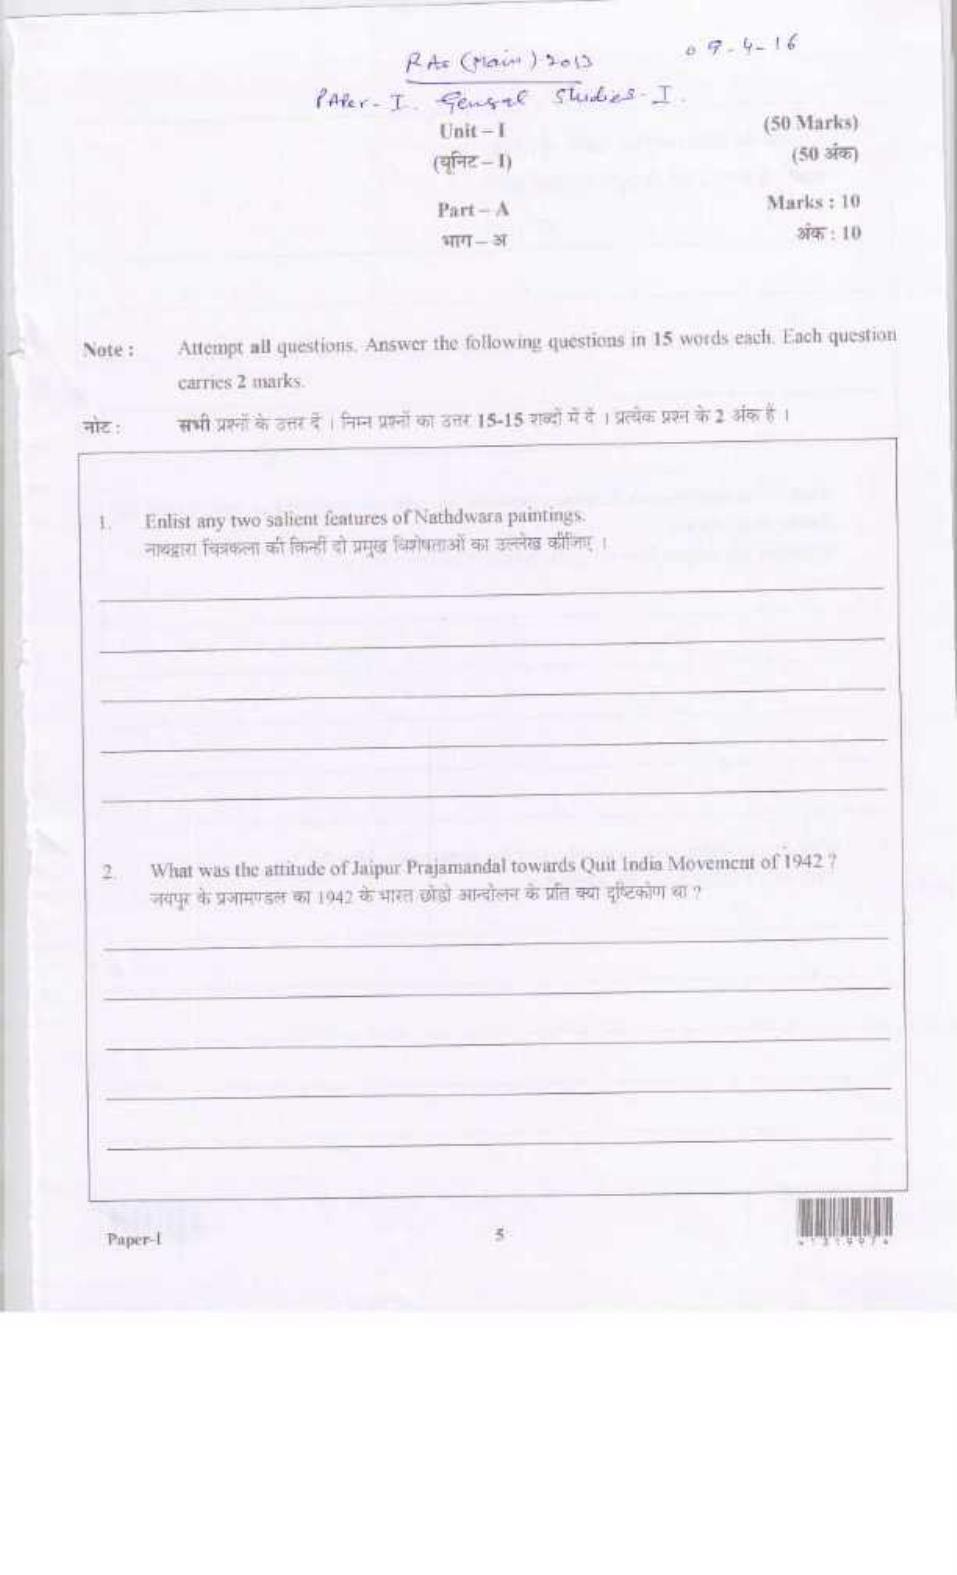 LUVAS Non-Teaching Sample Papers - Socio-Economic and Experience - Page 4